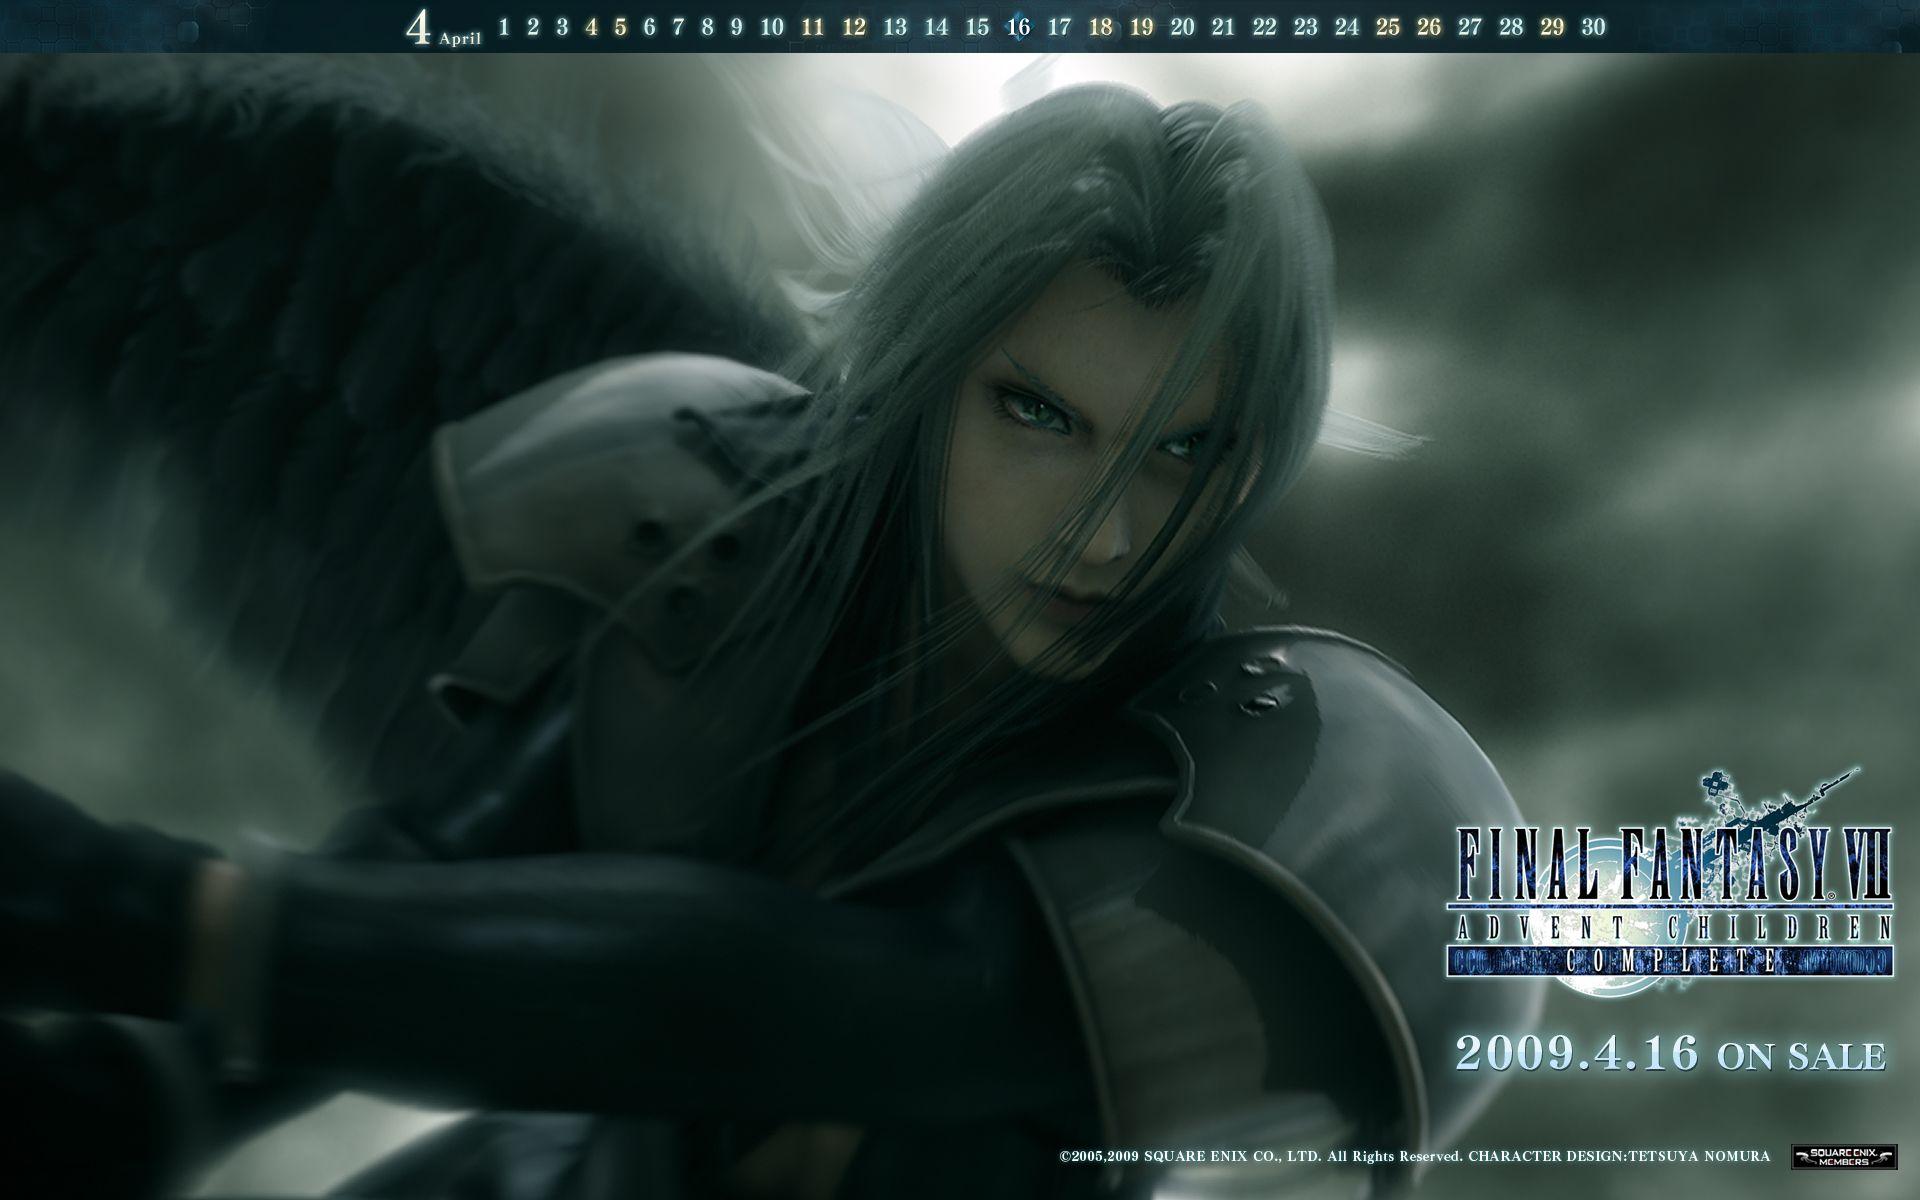 Two new Final Fantasy VII: Advent Children Wallpaper from SQEX